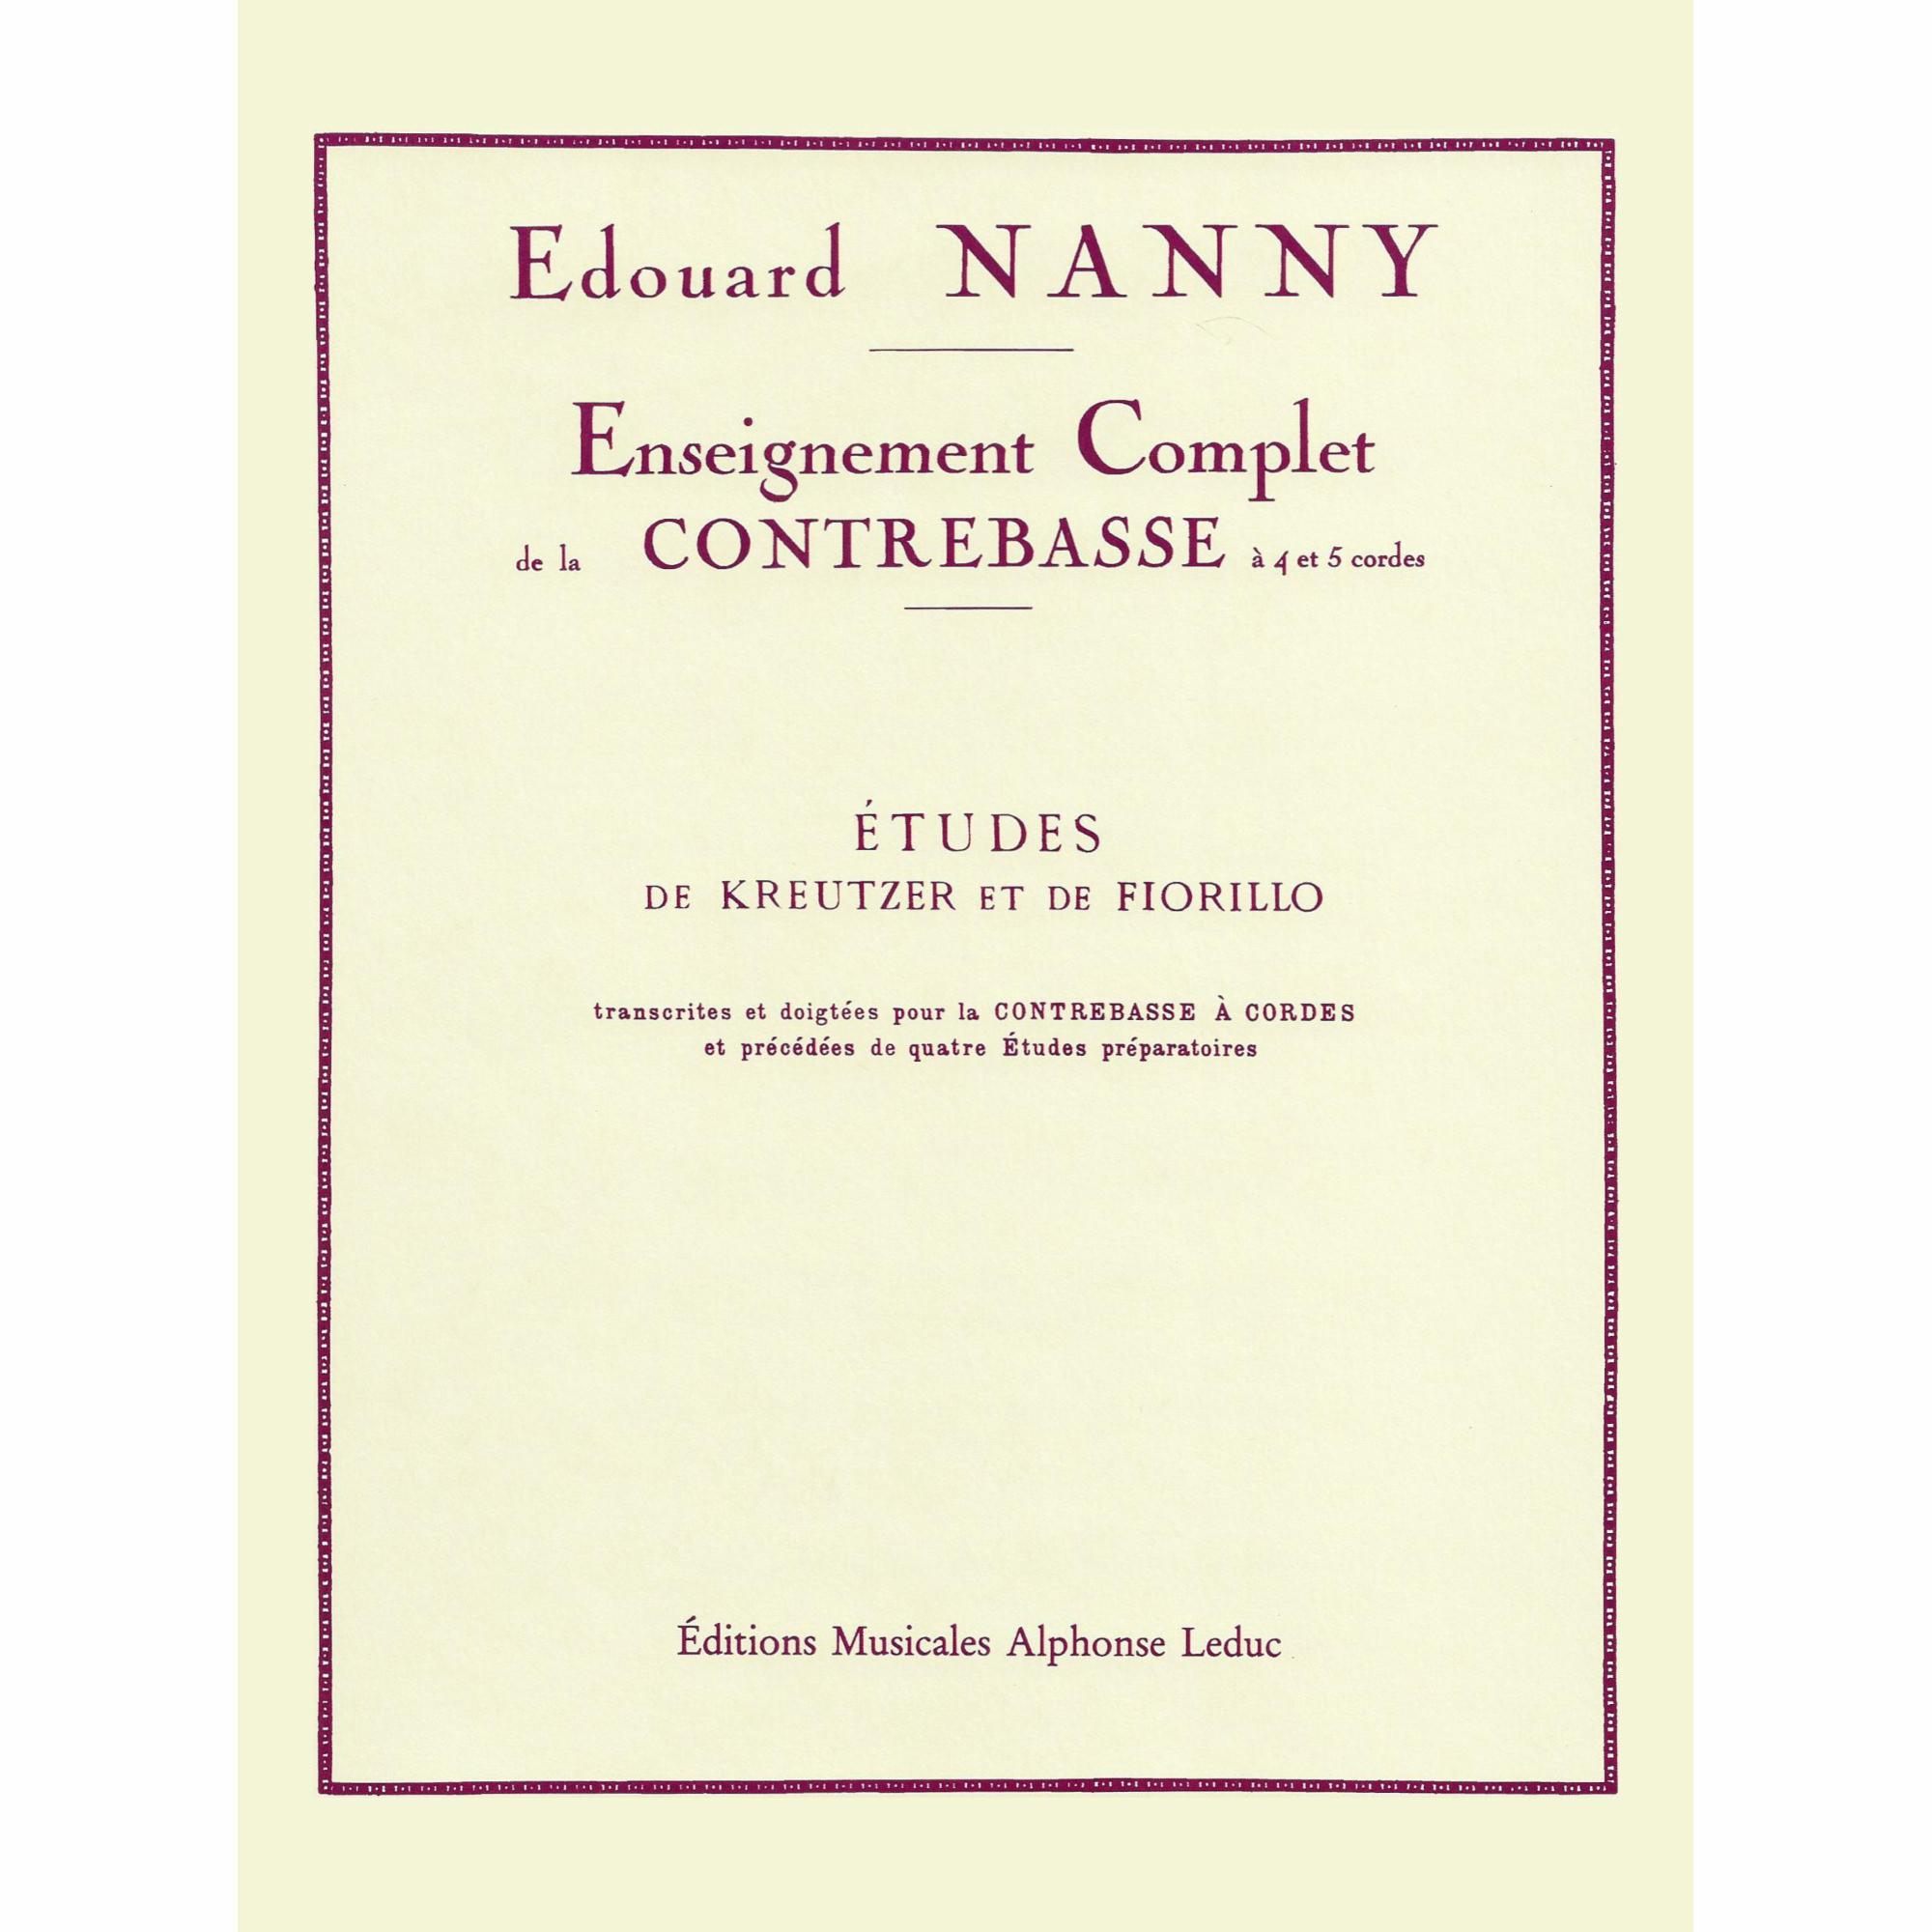 Nanny -- Etudes of Kreutzer and Fiorillo for Bass